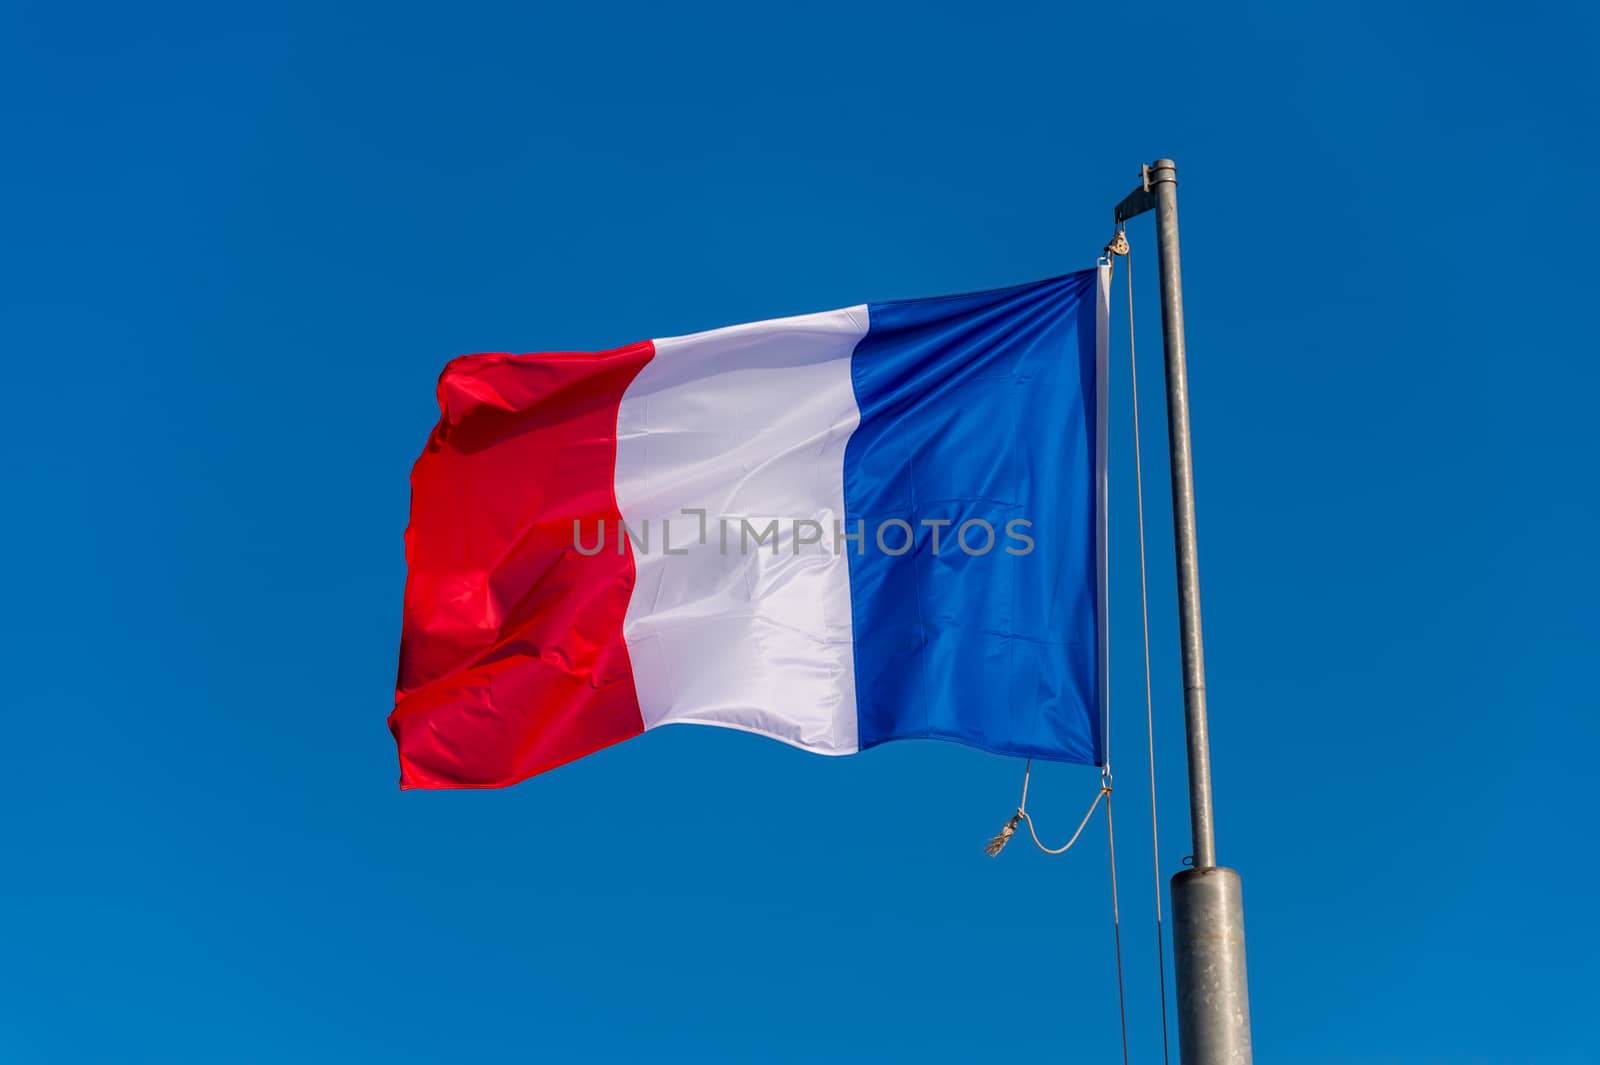 French flag waving against blue sky in Boulogne sur Mer, France. by mbruxelle